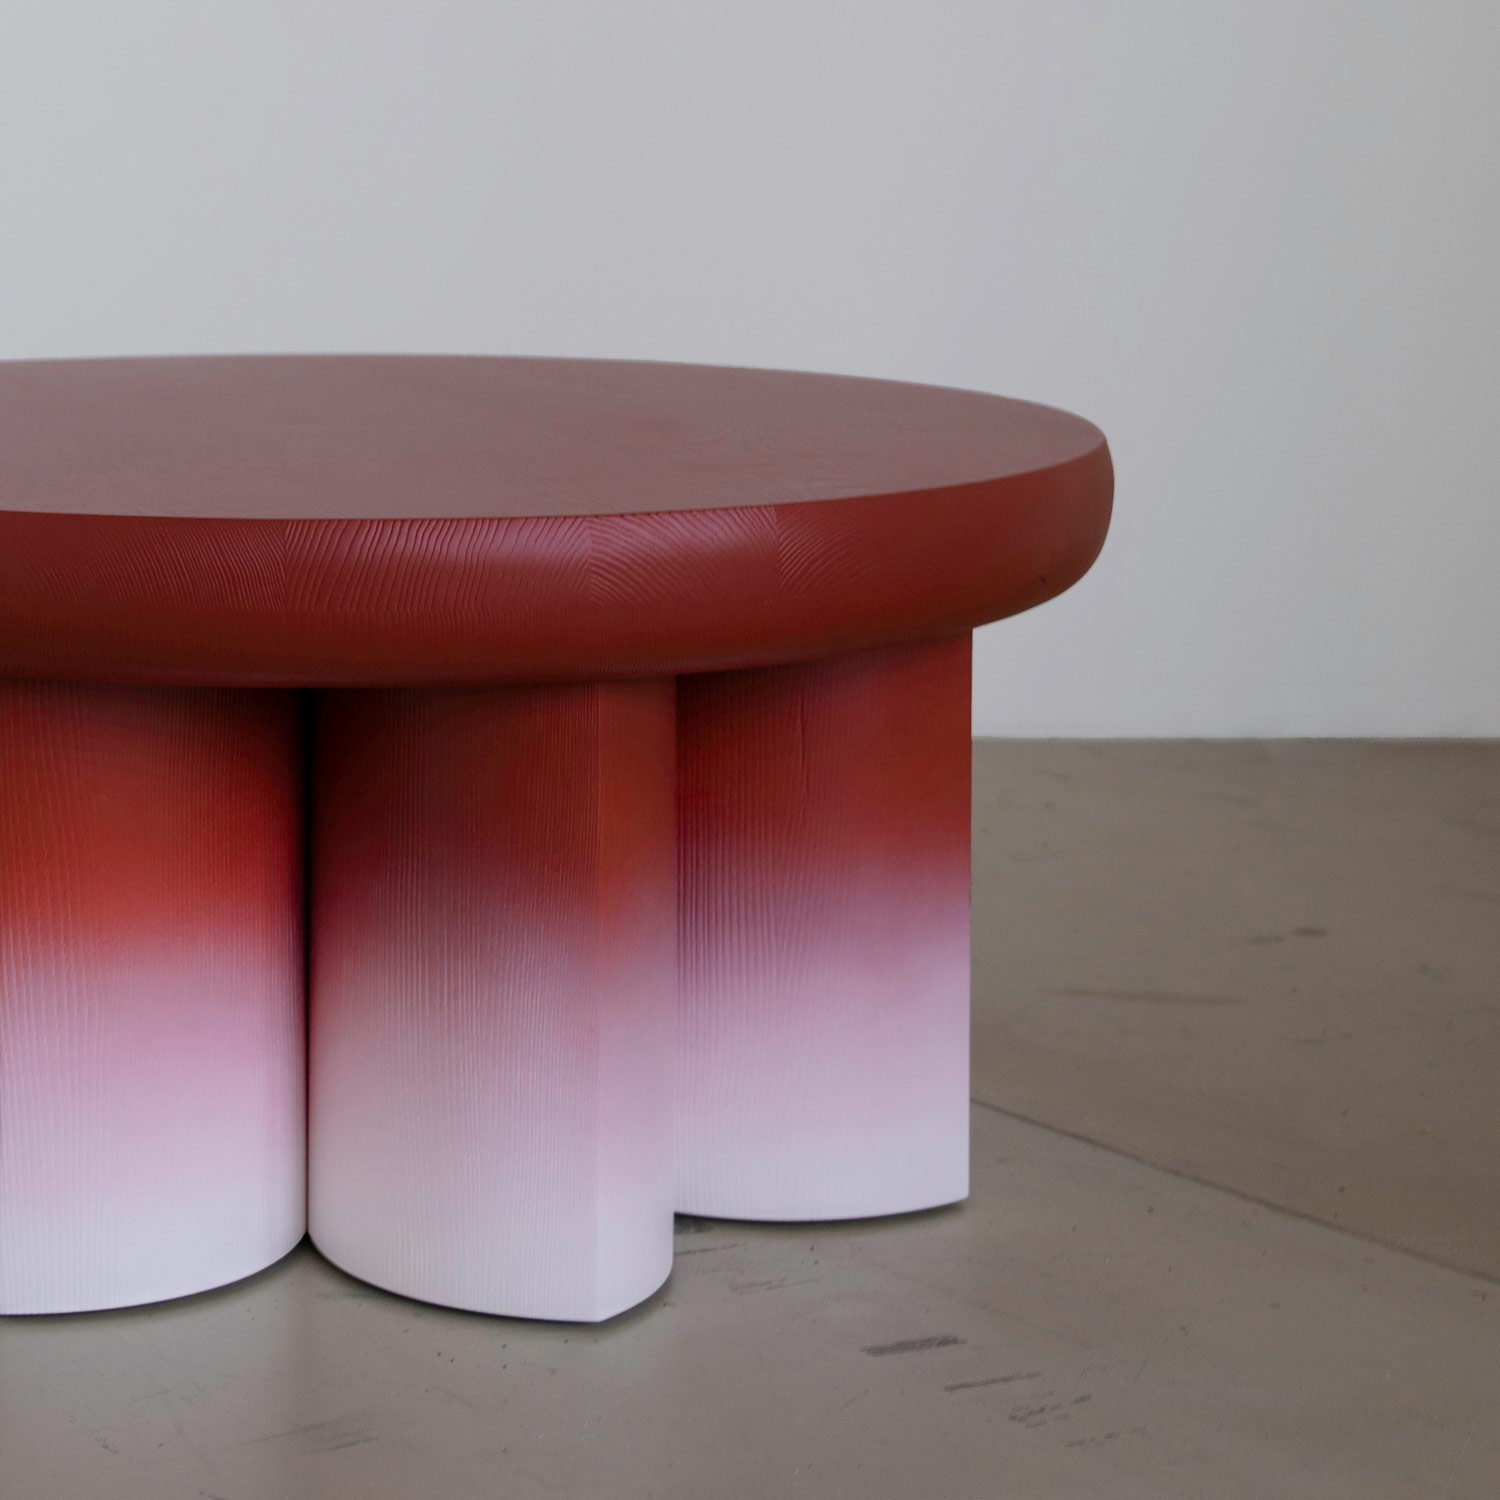 Rosette-low conference table with gradient